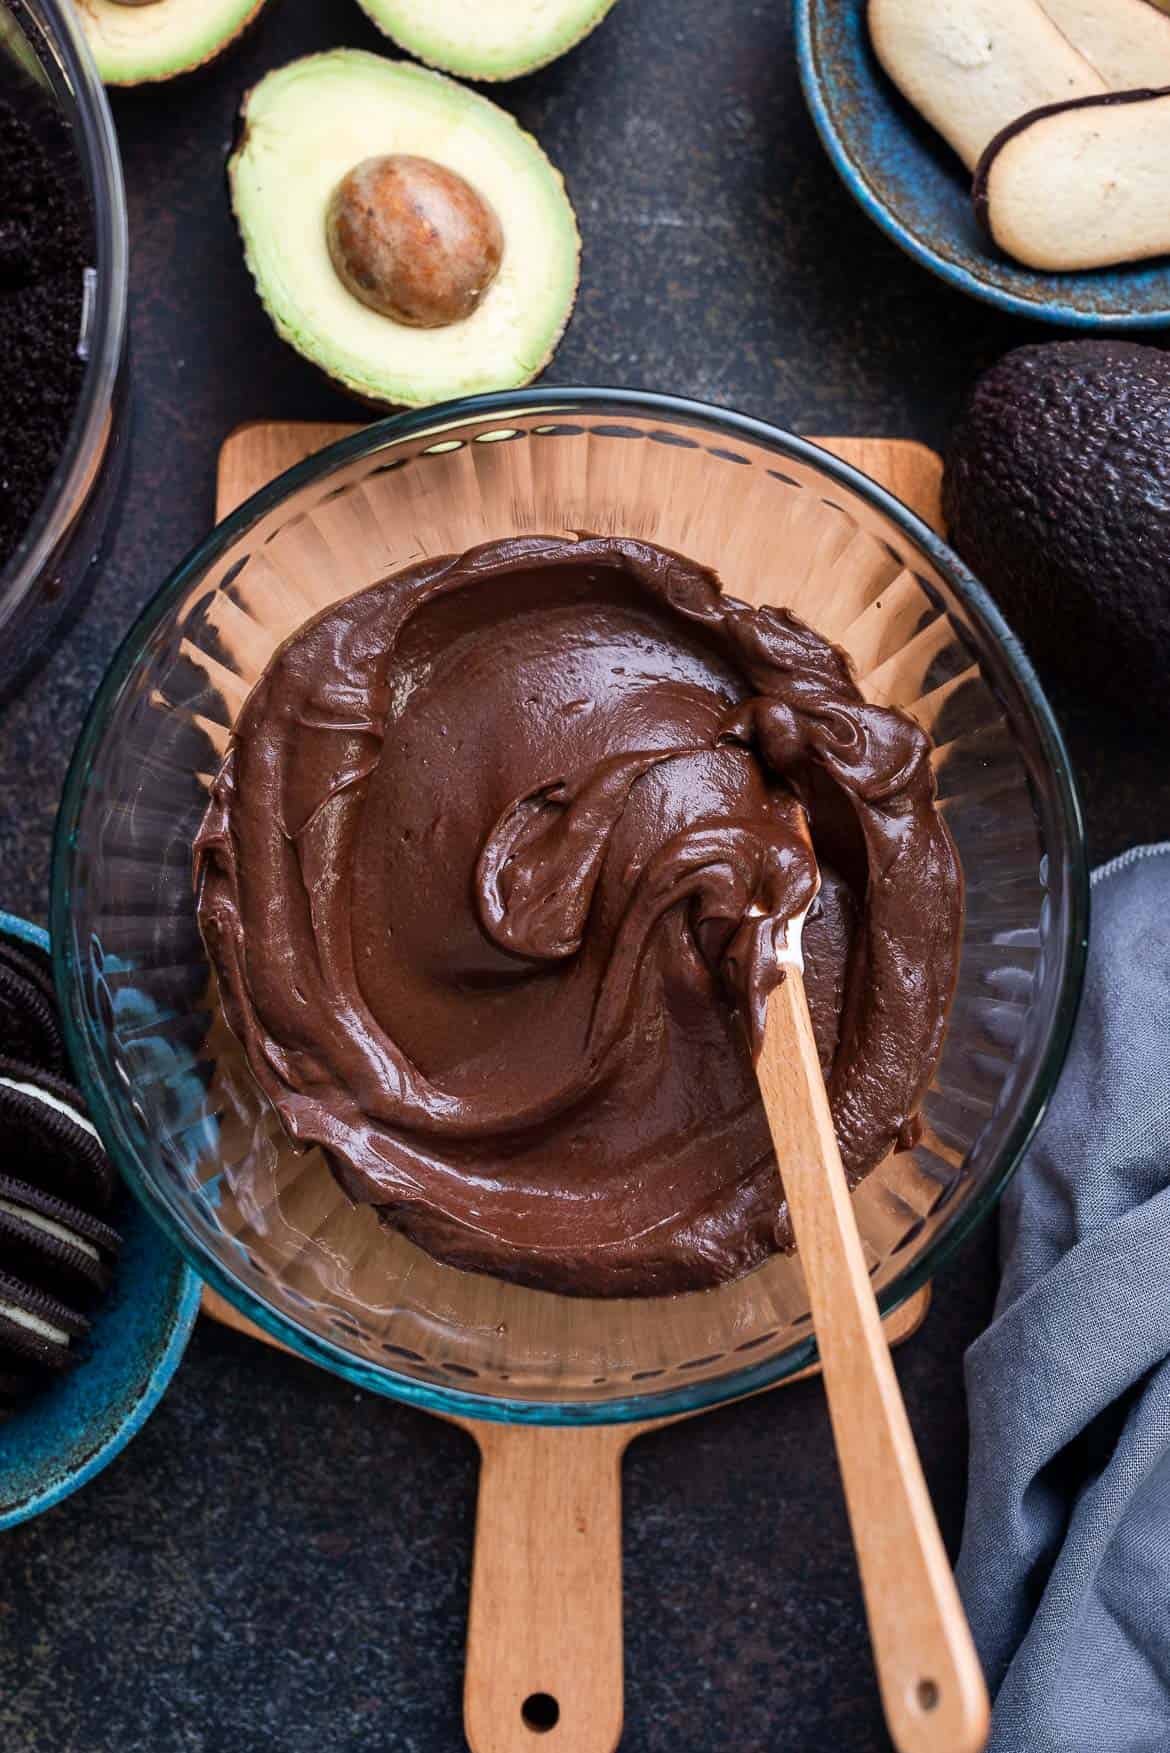 Avocado Chocolate Pudding in a bowl for Halloween dirt cups.